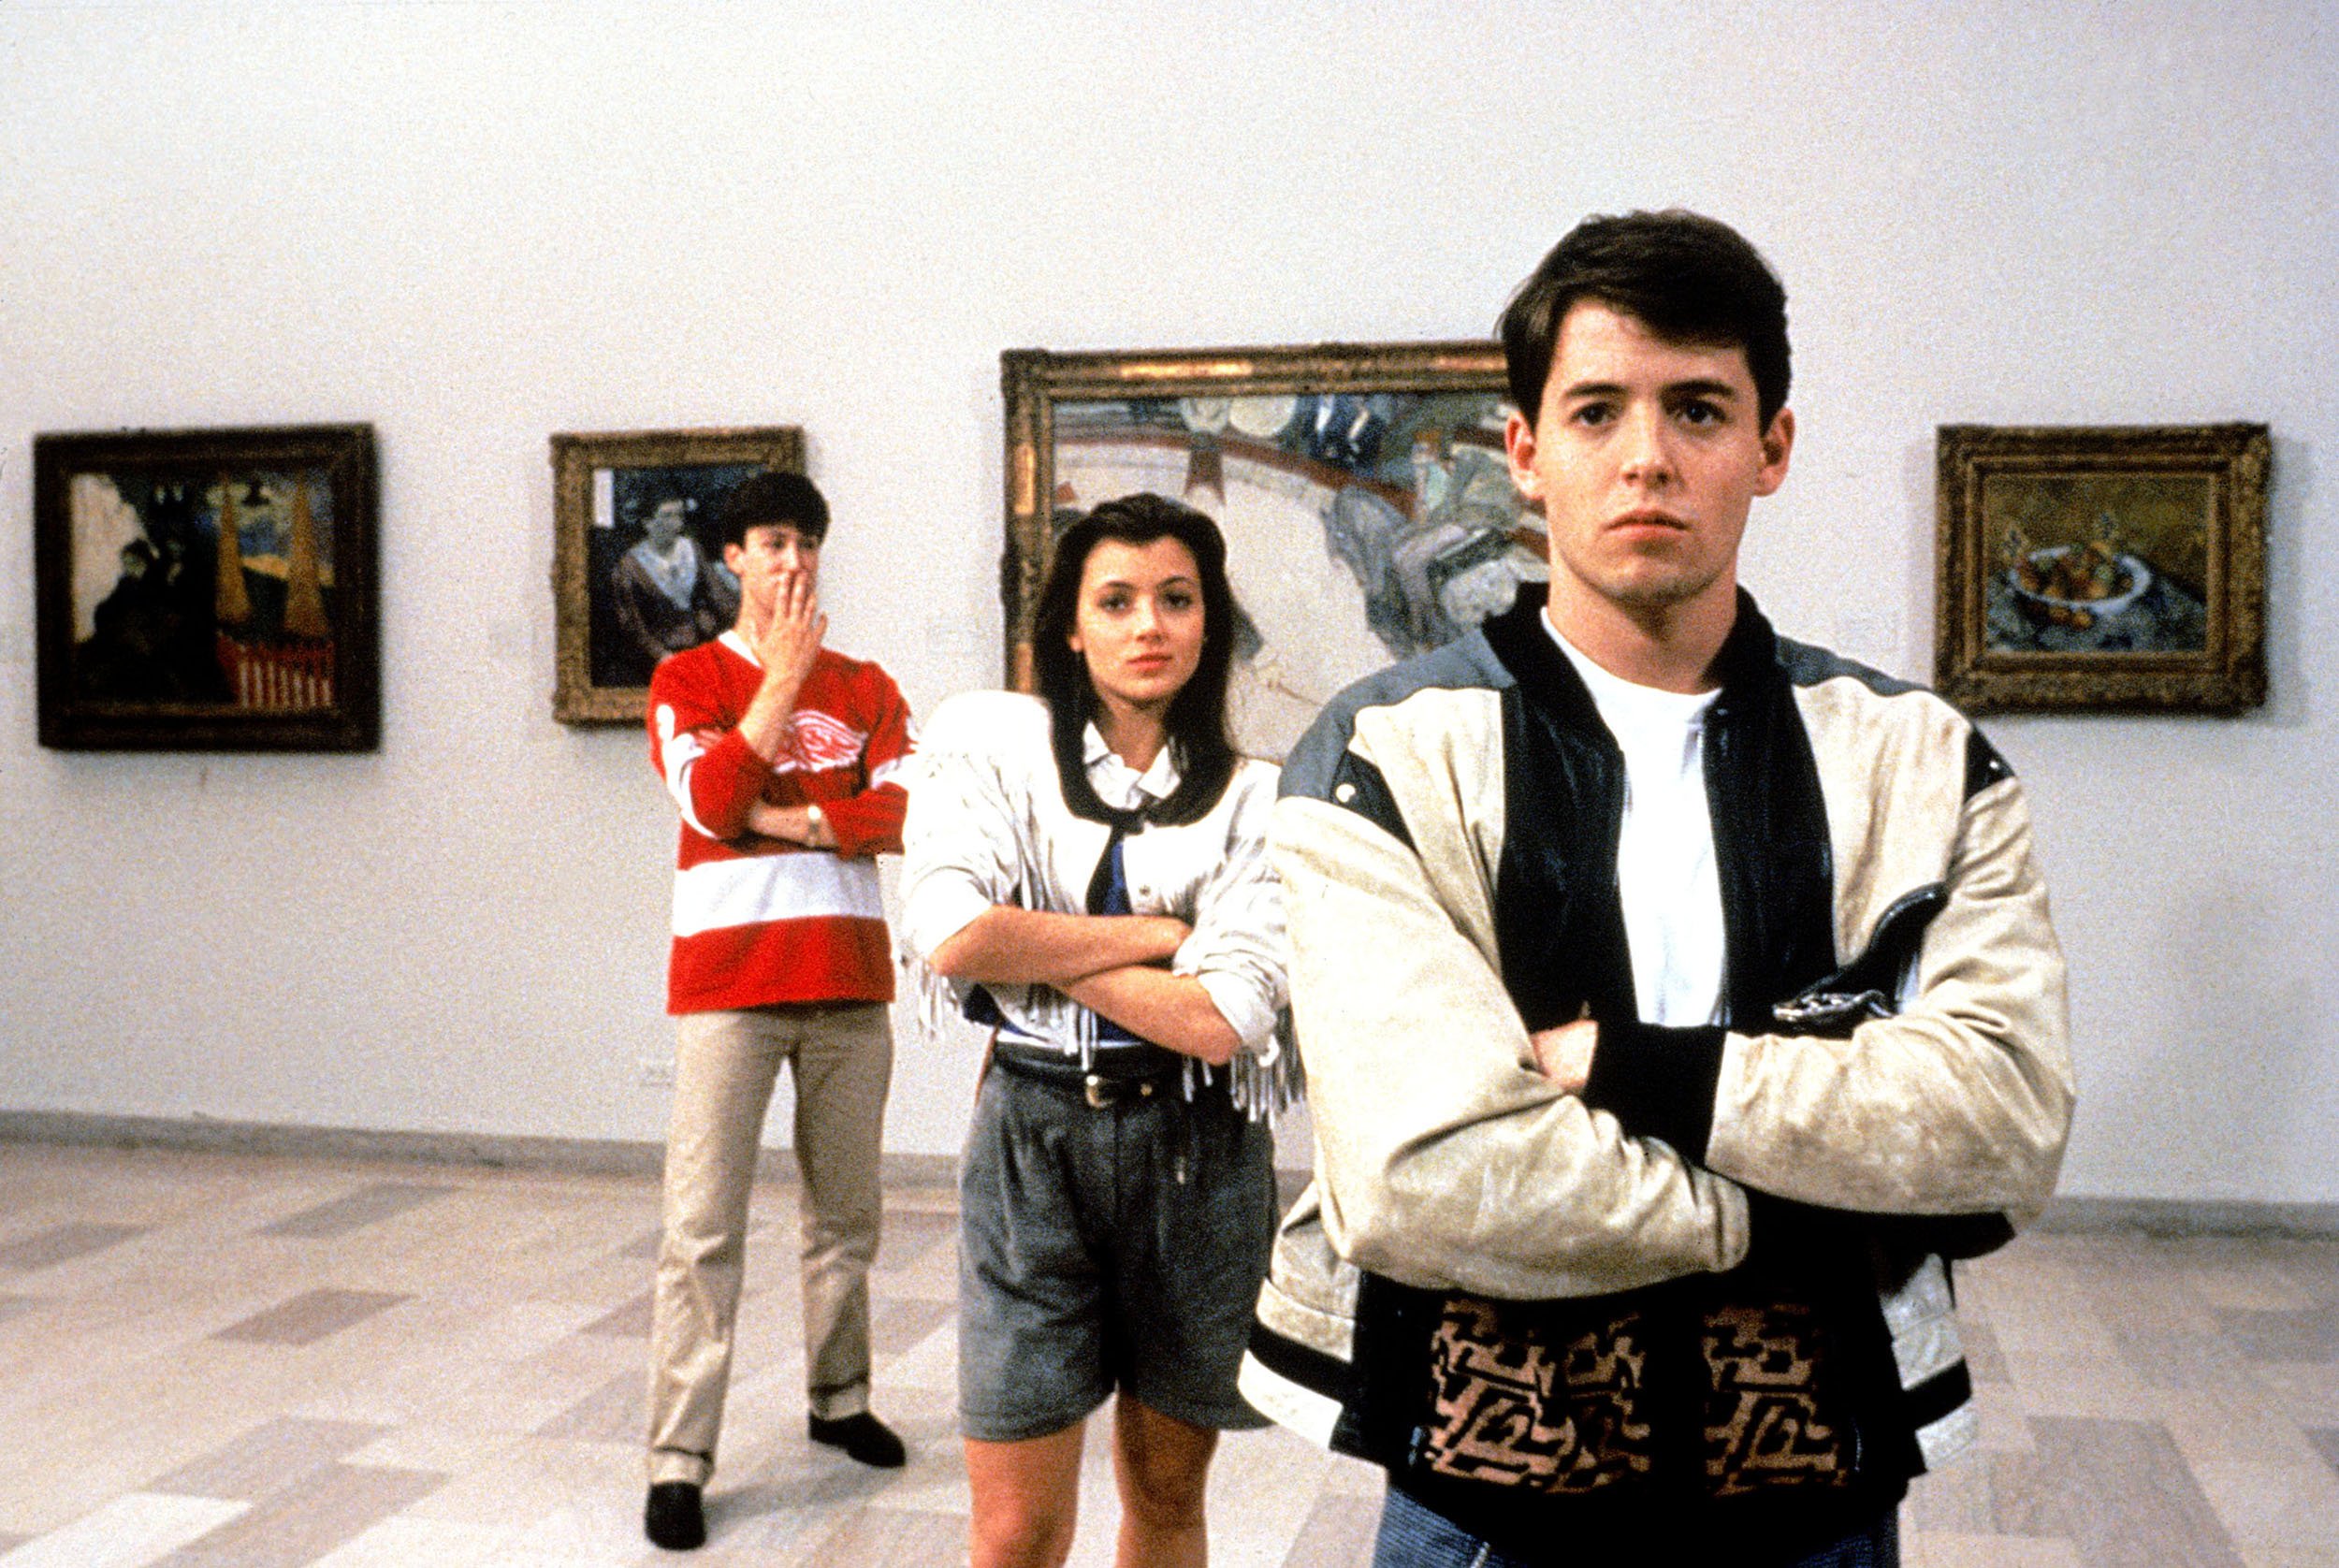 Ferris Bueller's Day Off is an '80s movie that still holds up